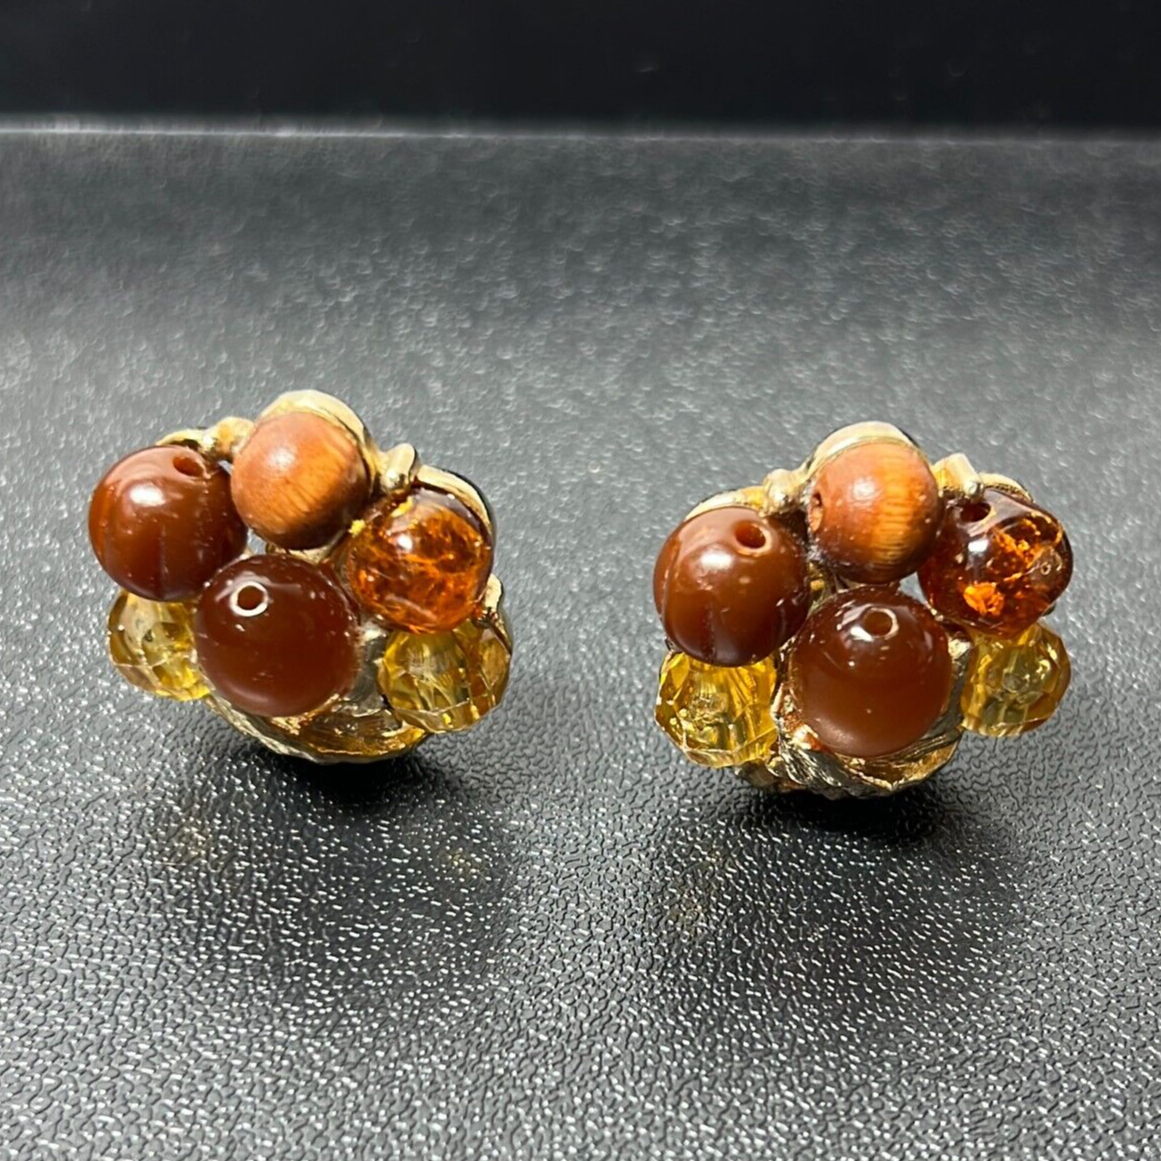 ART Gold Tone Brown Stones Floral Costume Jewelry Clip-On Earrings